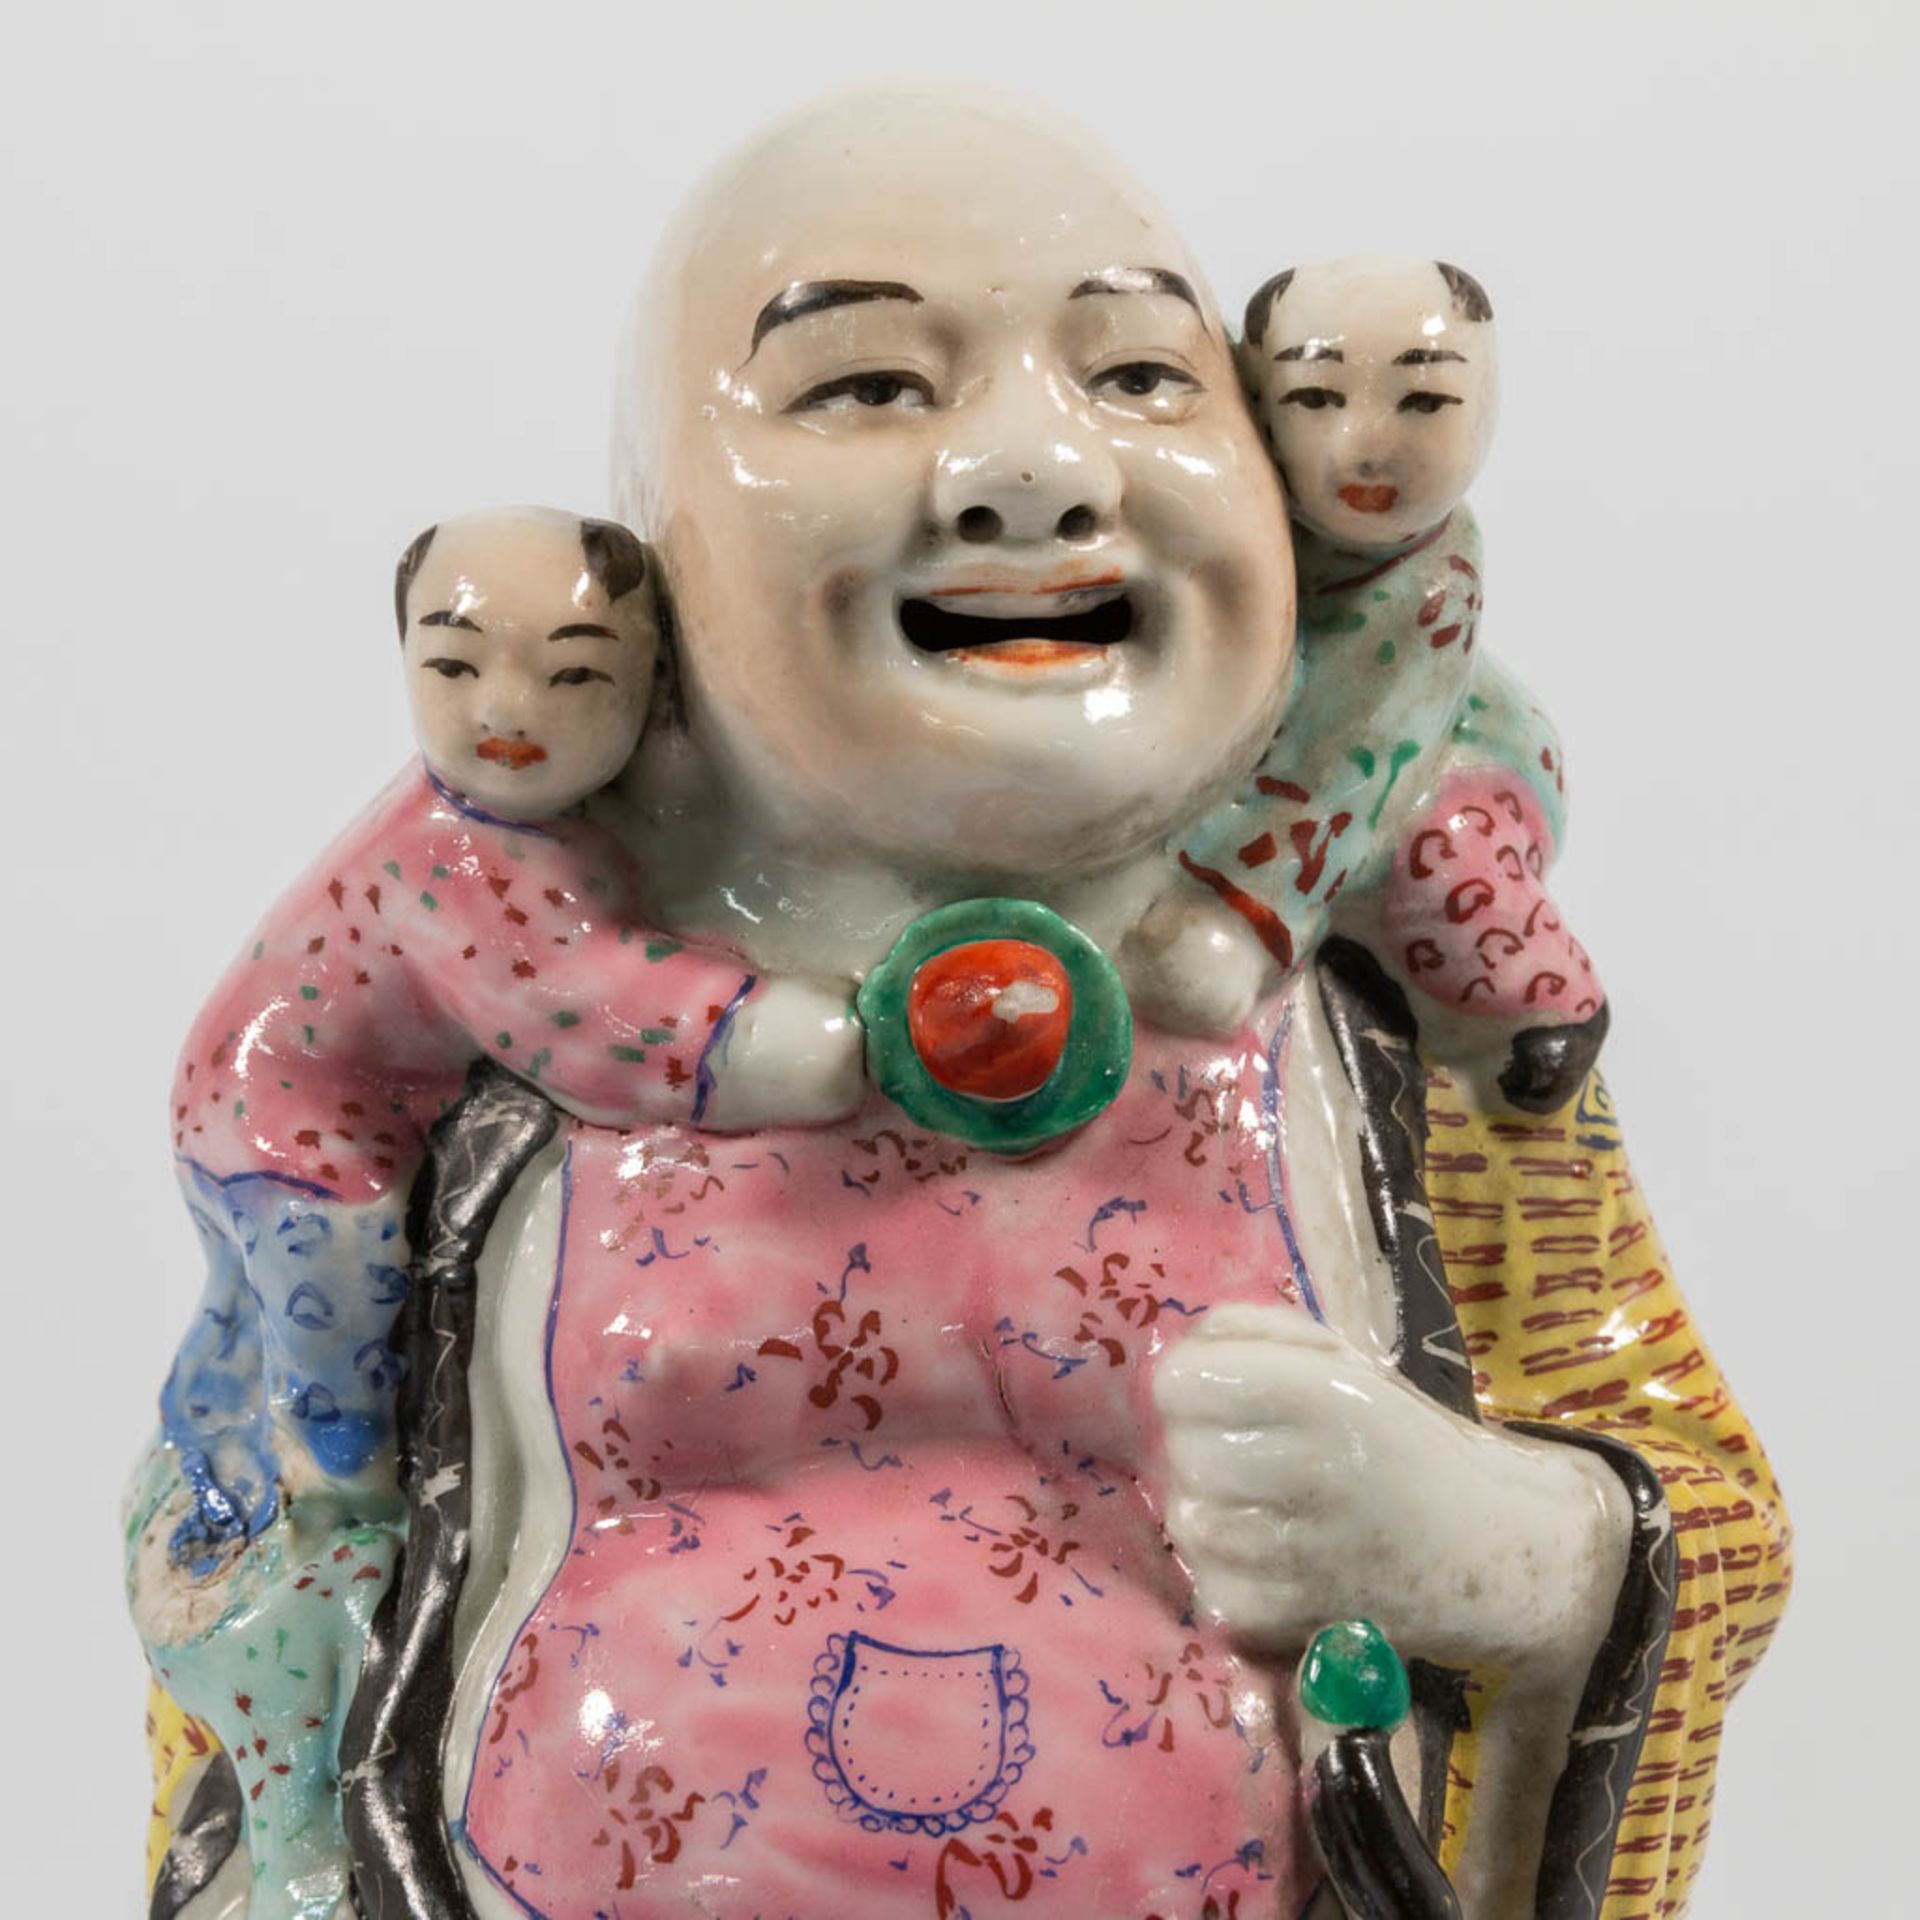 A Collection of 4 Chinese immortal figurines, made of porcelain. - Image 22 of 25